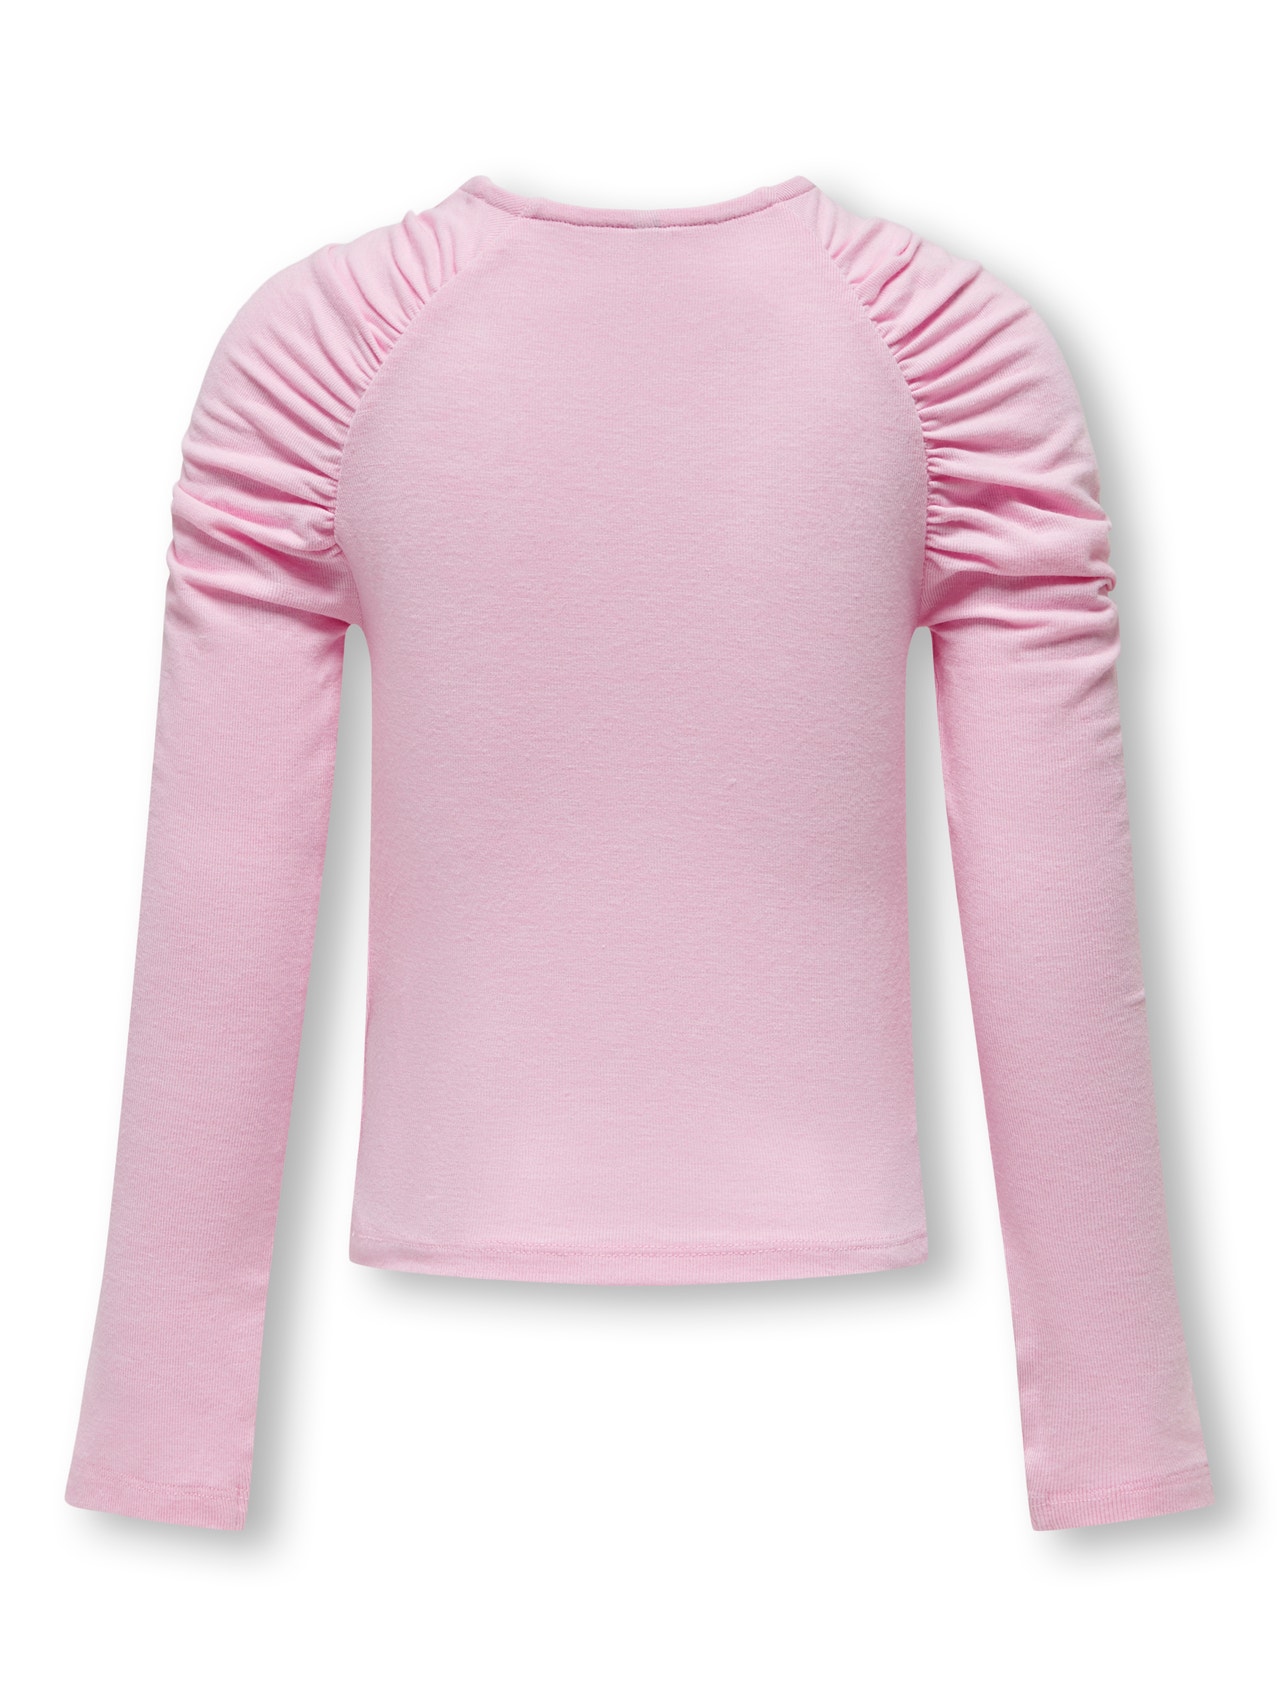 ONLY O-neck top -Pink Lady - 15302451